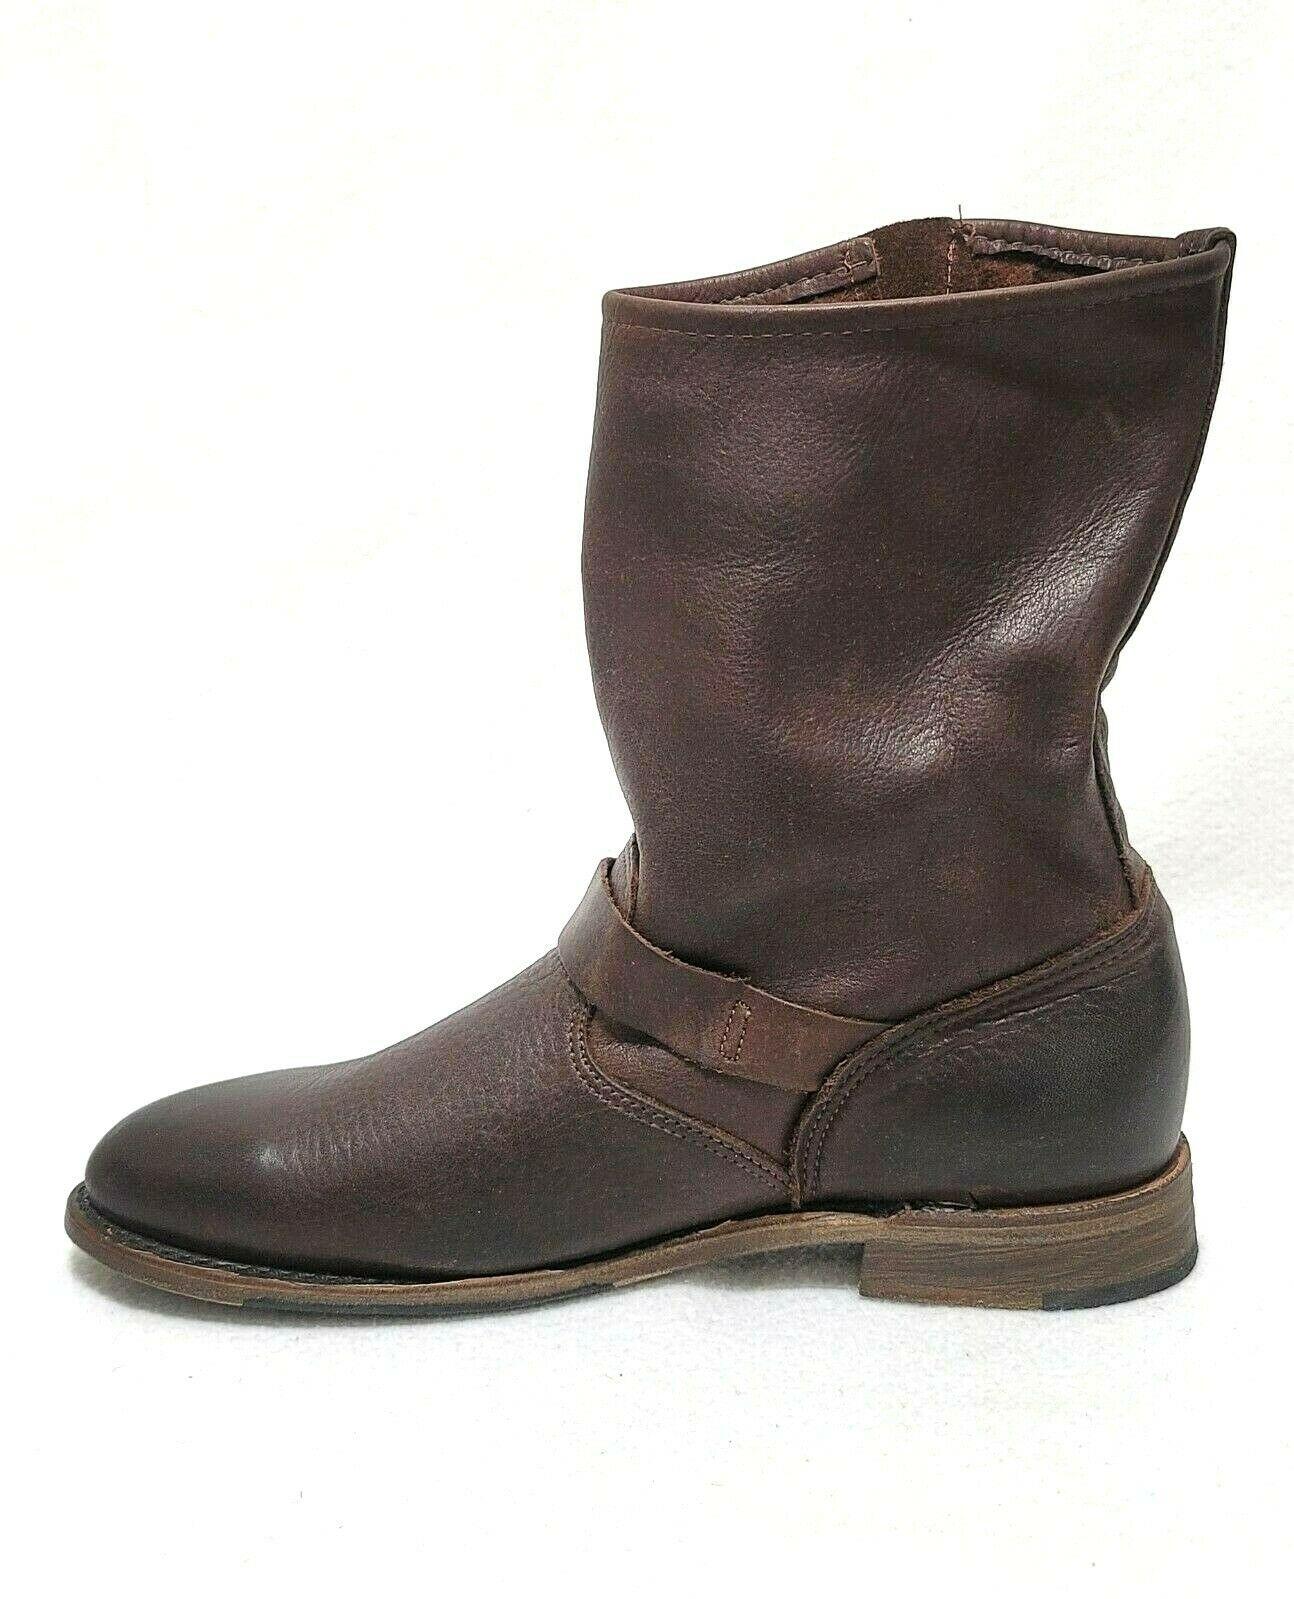 Walk Over Vintage Shoe Co leather Veronica Harness Slouchy Moto Boots Size US 10 - SVNYFancy